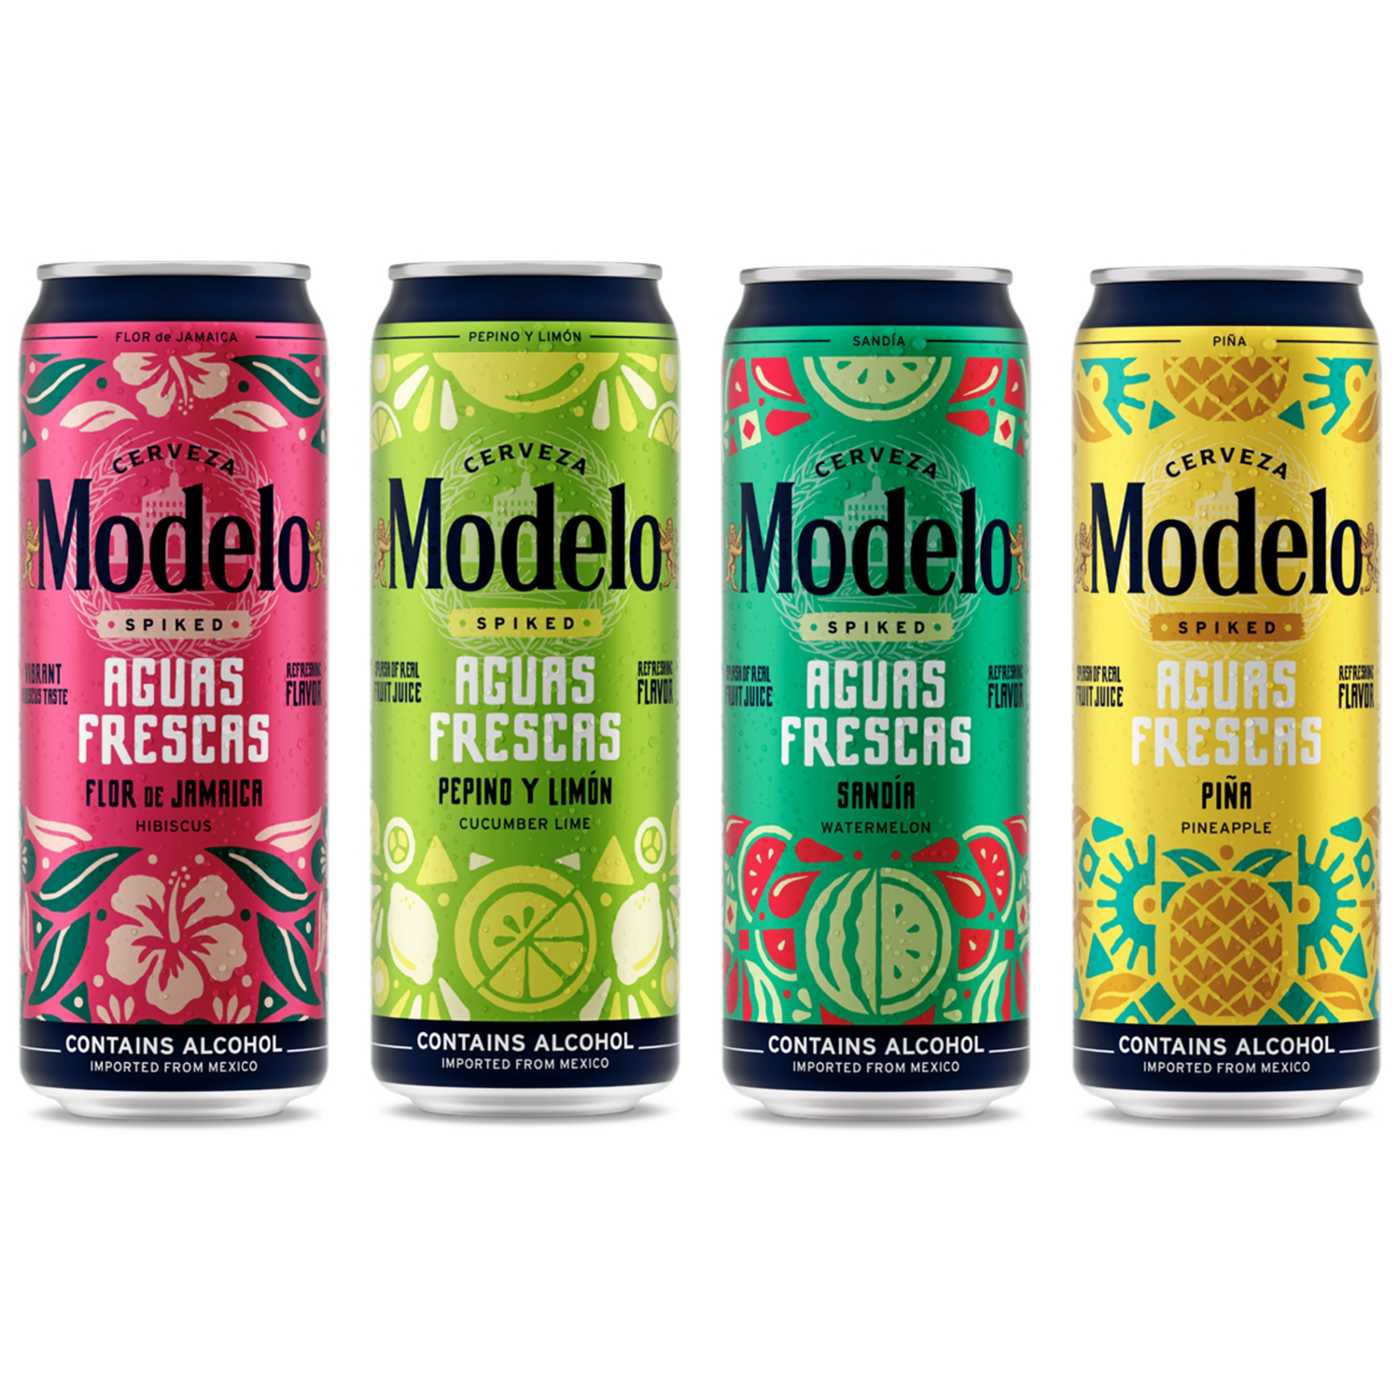 Modelo Spiked Aguas Frescas Spiked Frescas Variety Pack 12 pk Cans; image 8 of 8